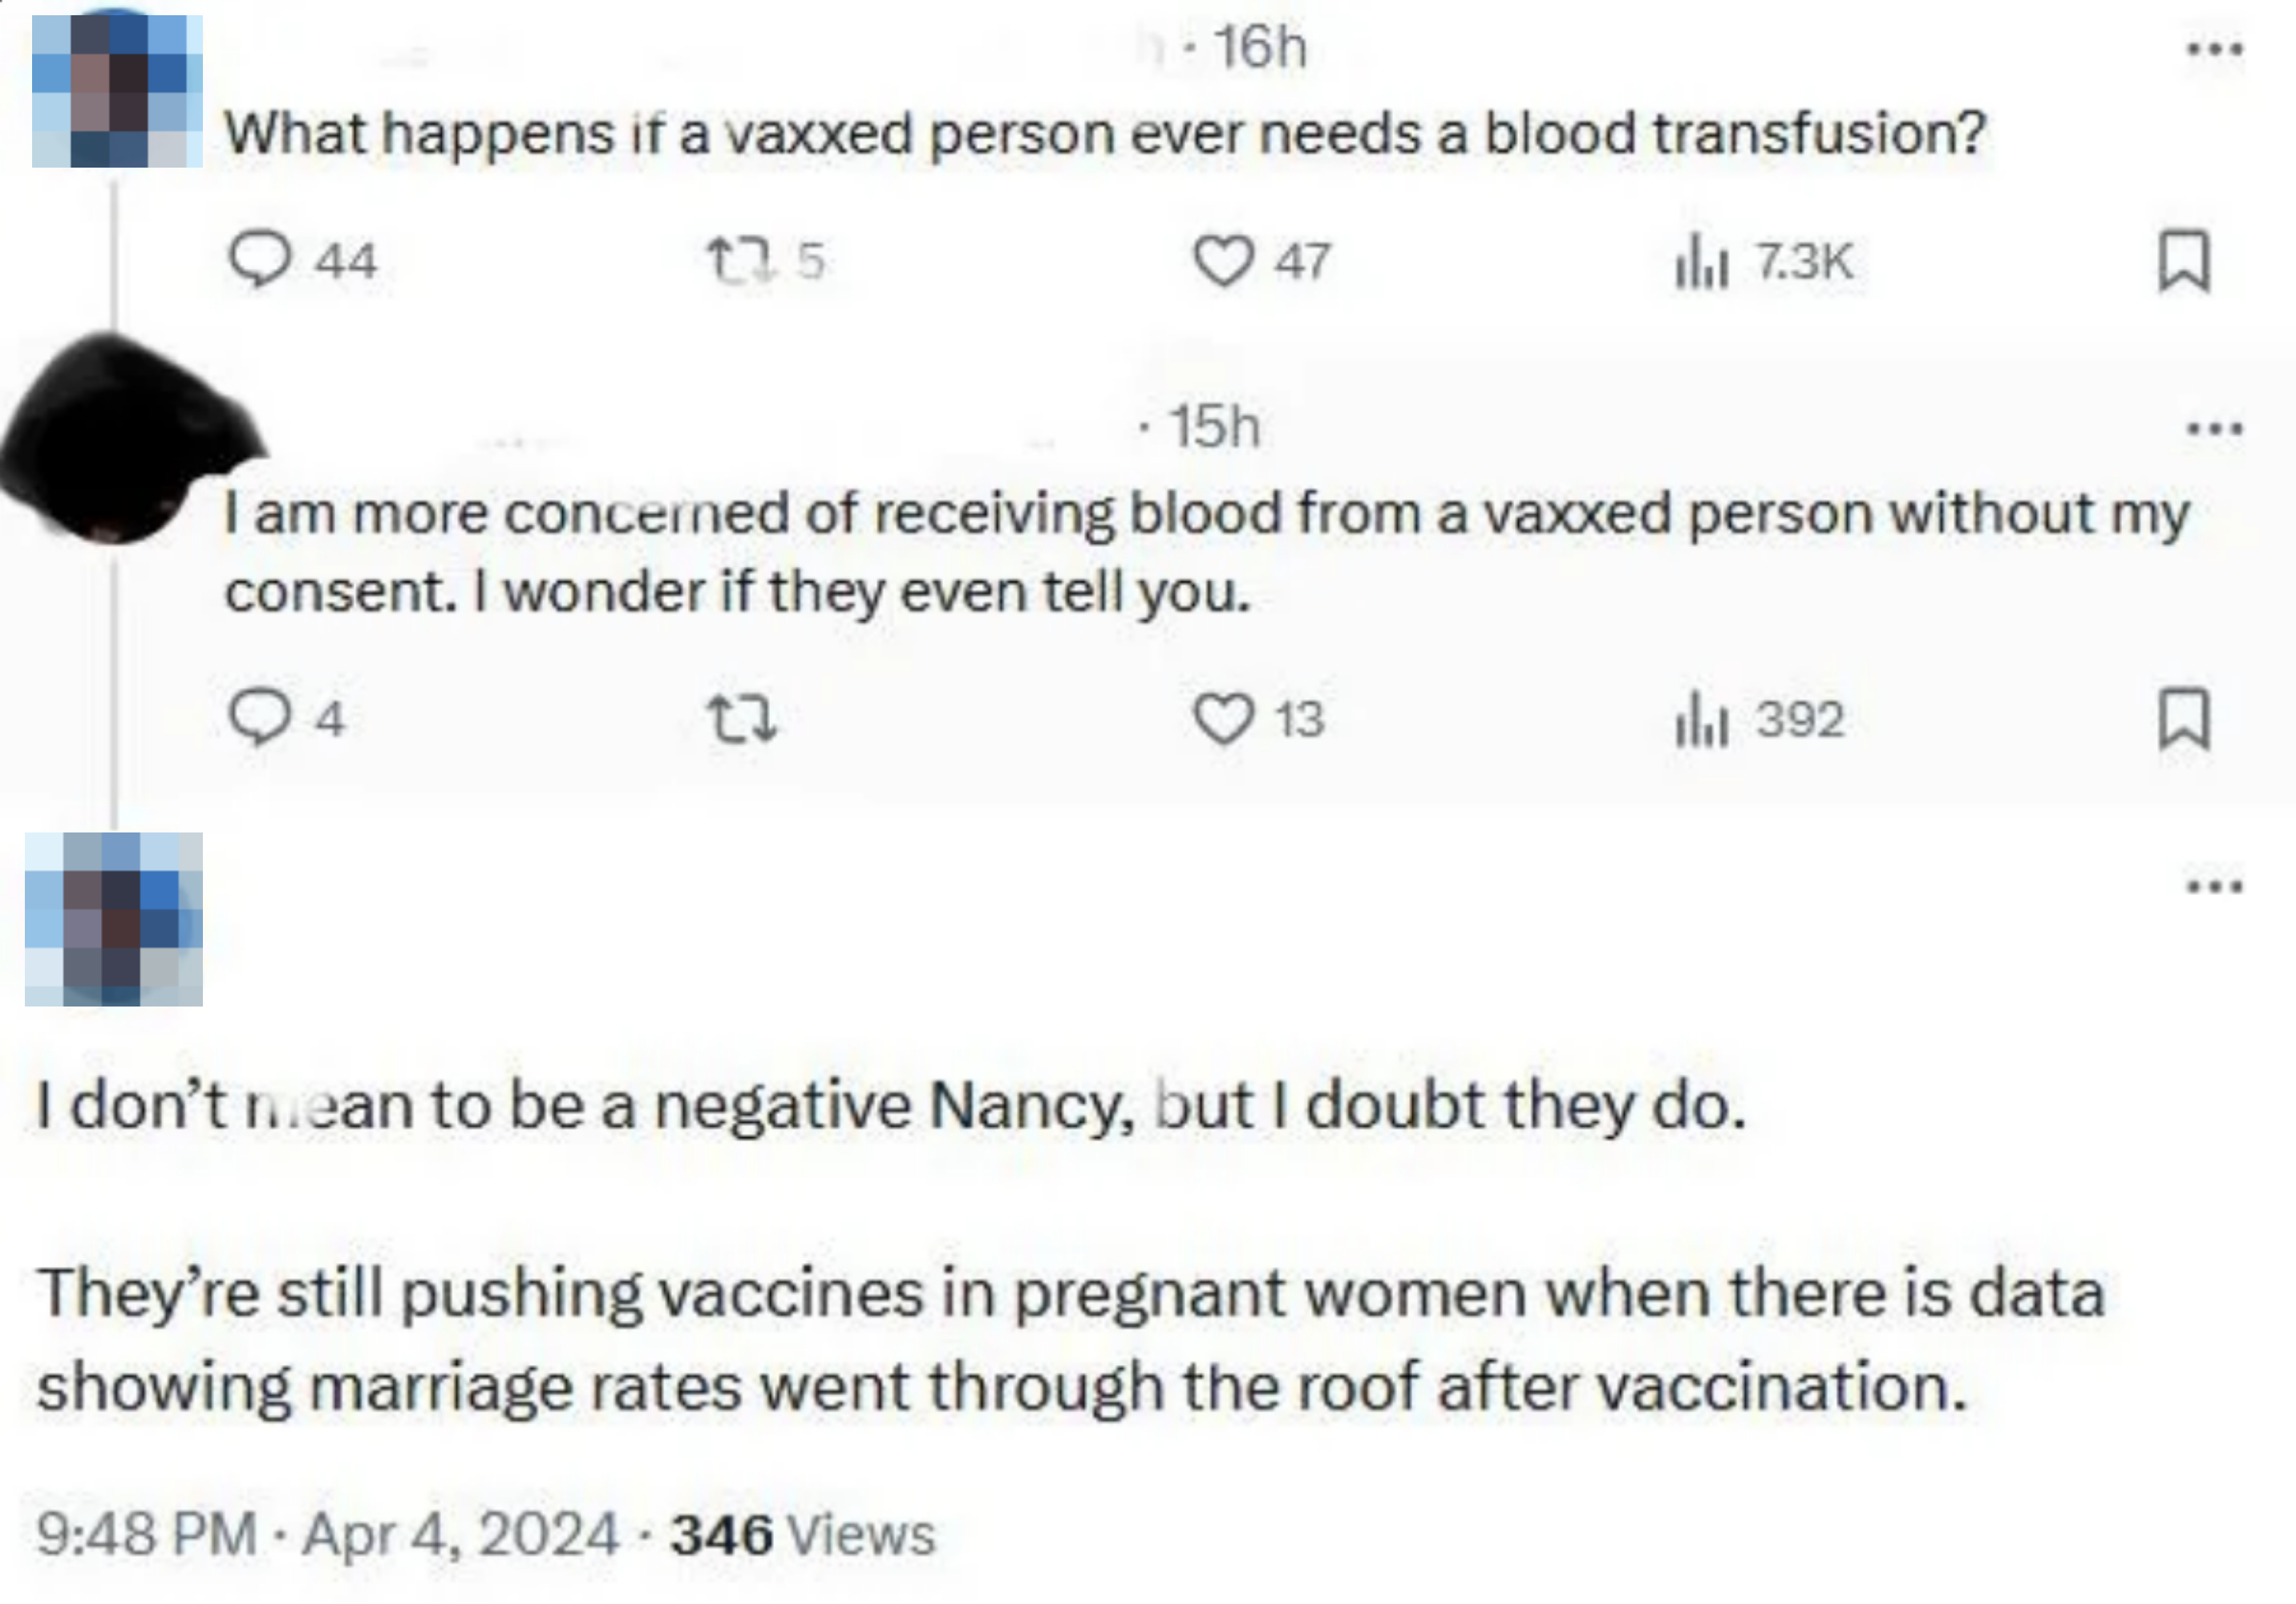 A screenshot of social media posts where users discuss their concerns about receiving blood from vaccinated individuals